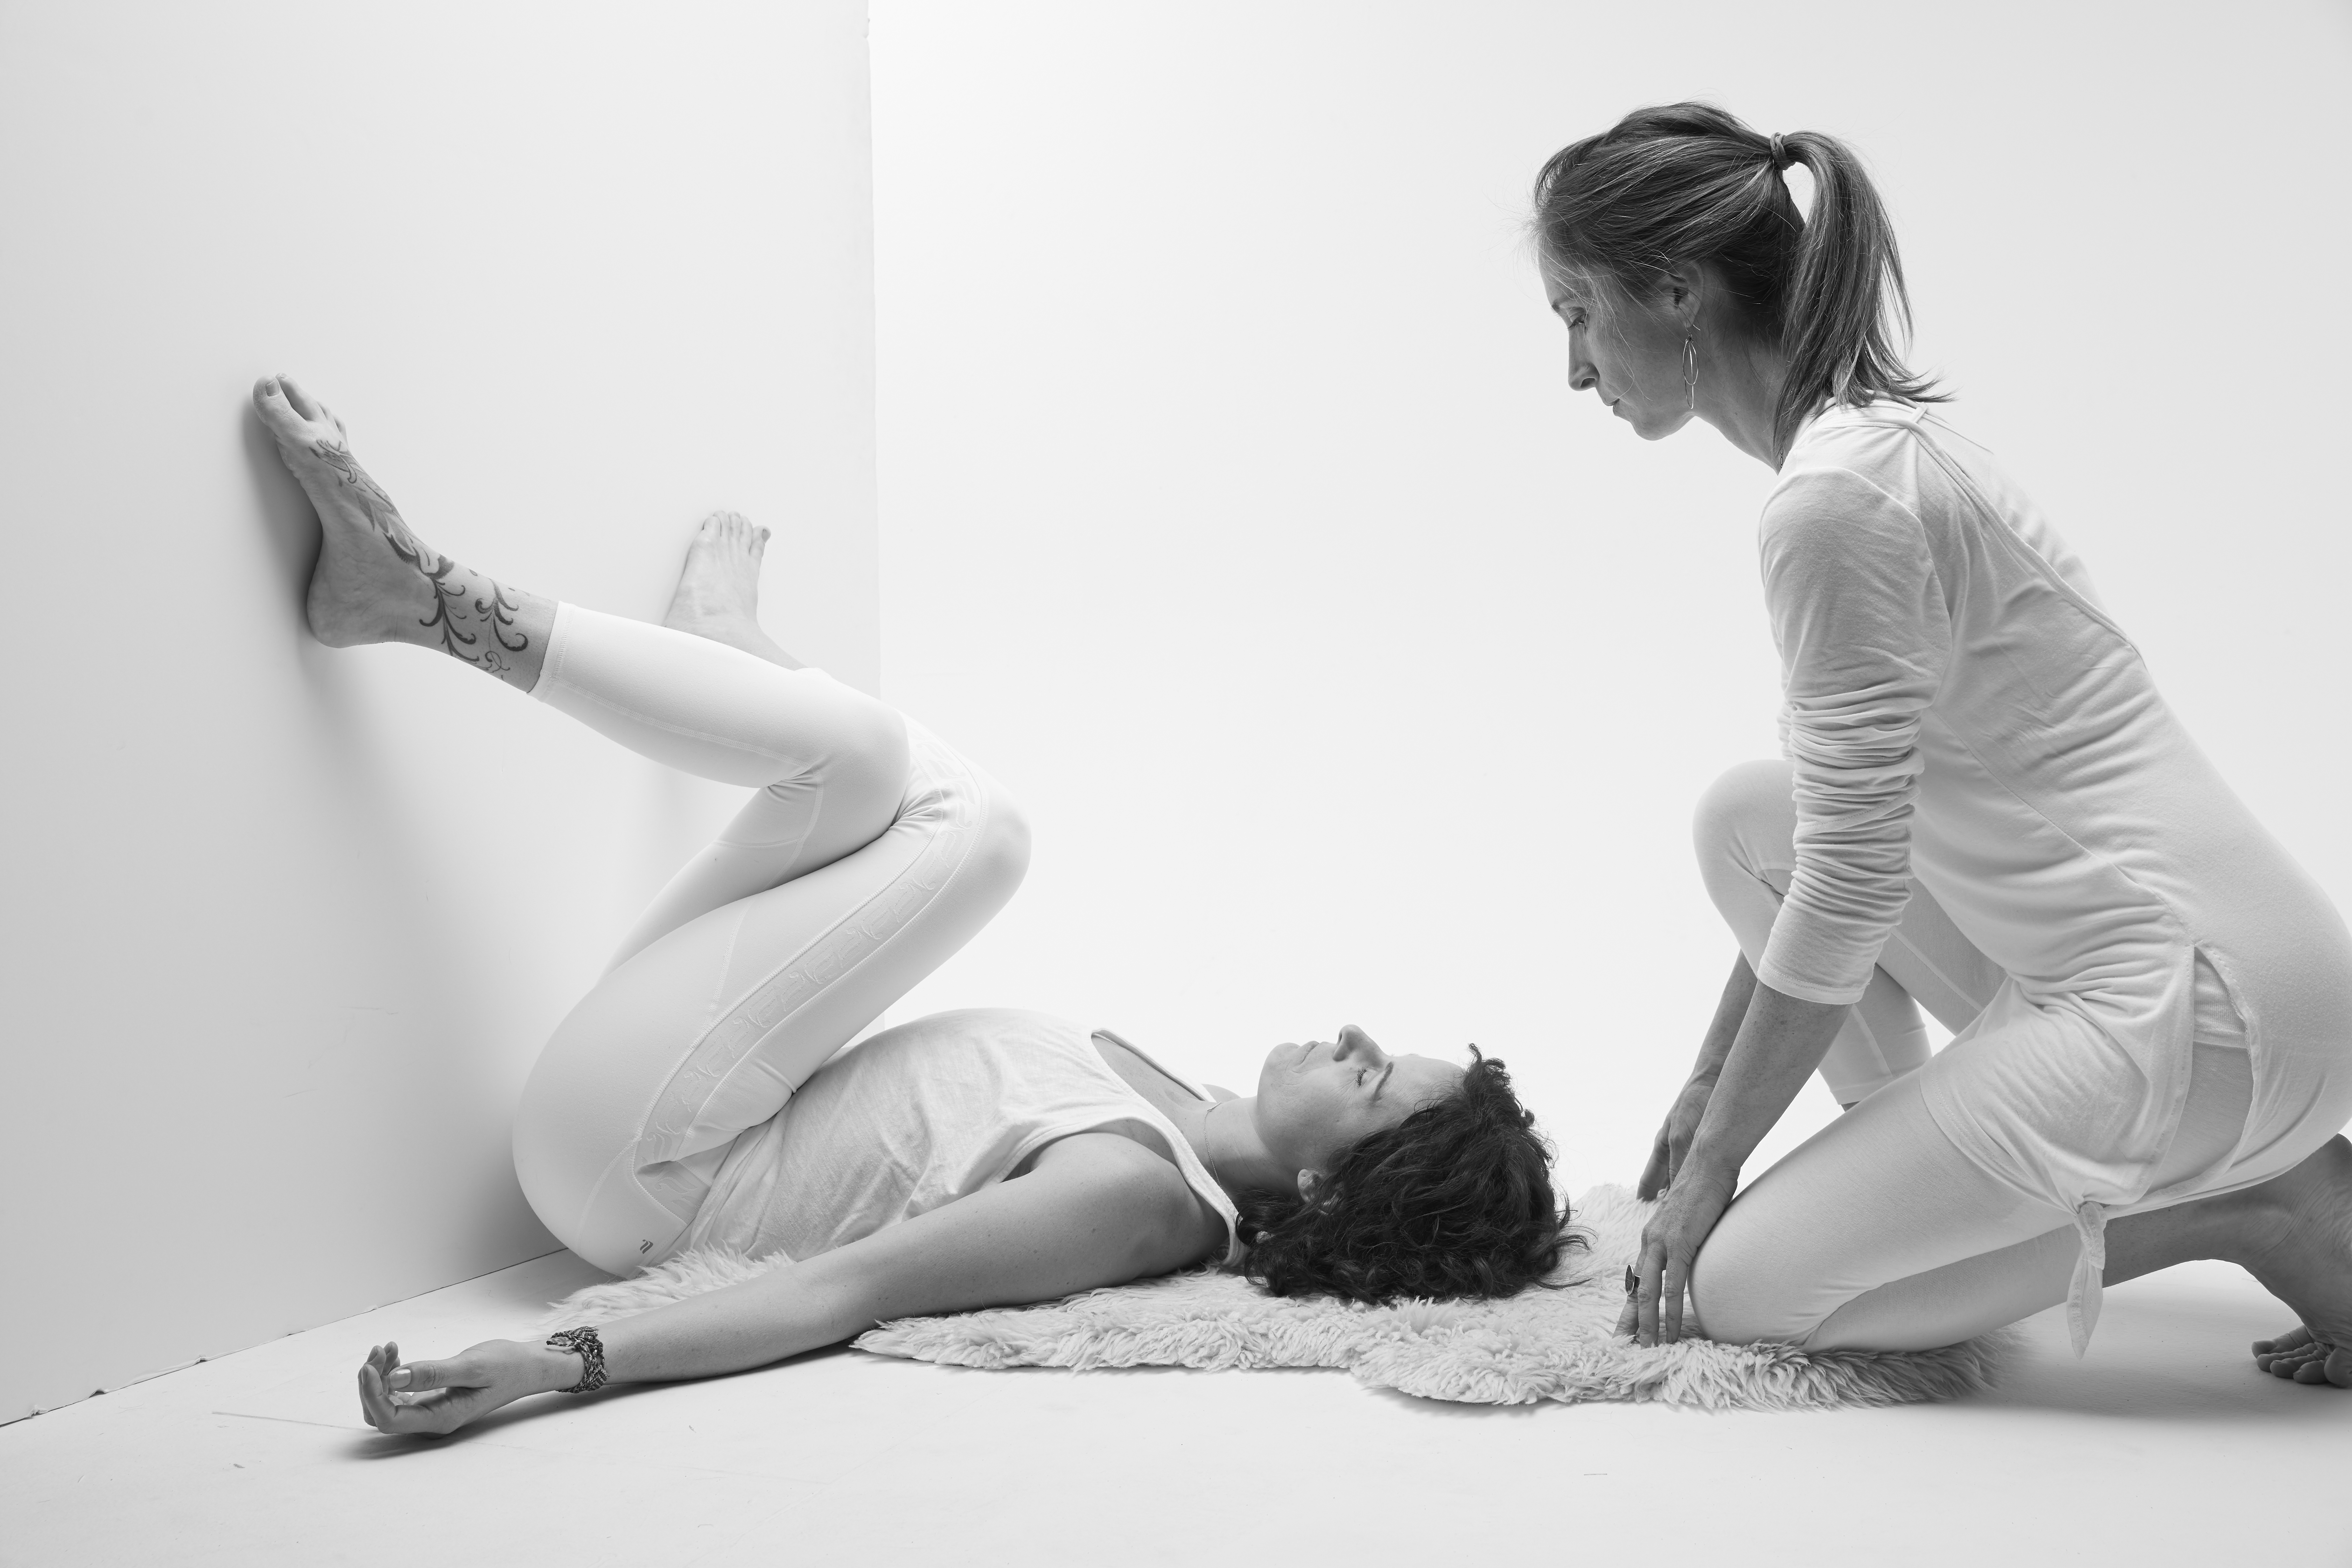 black and white image of yoga teacher Ivy Hughes demonstrating shoelace pose at the wall with Yoga teacher Kari Kwinn supporting